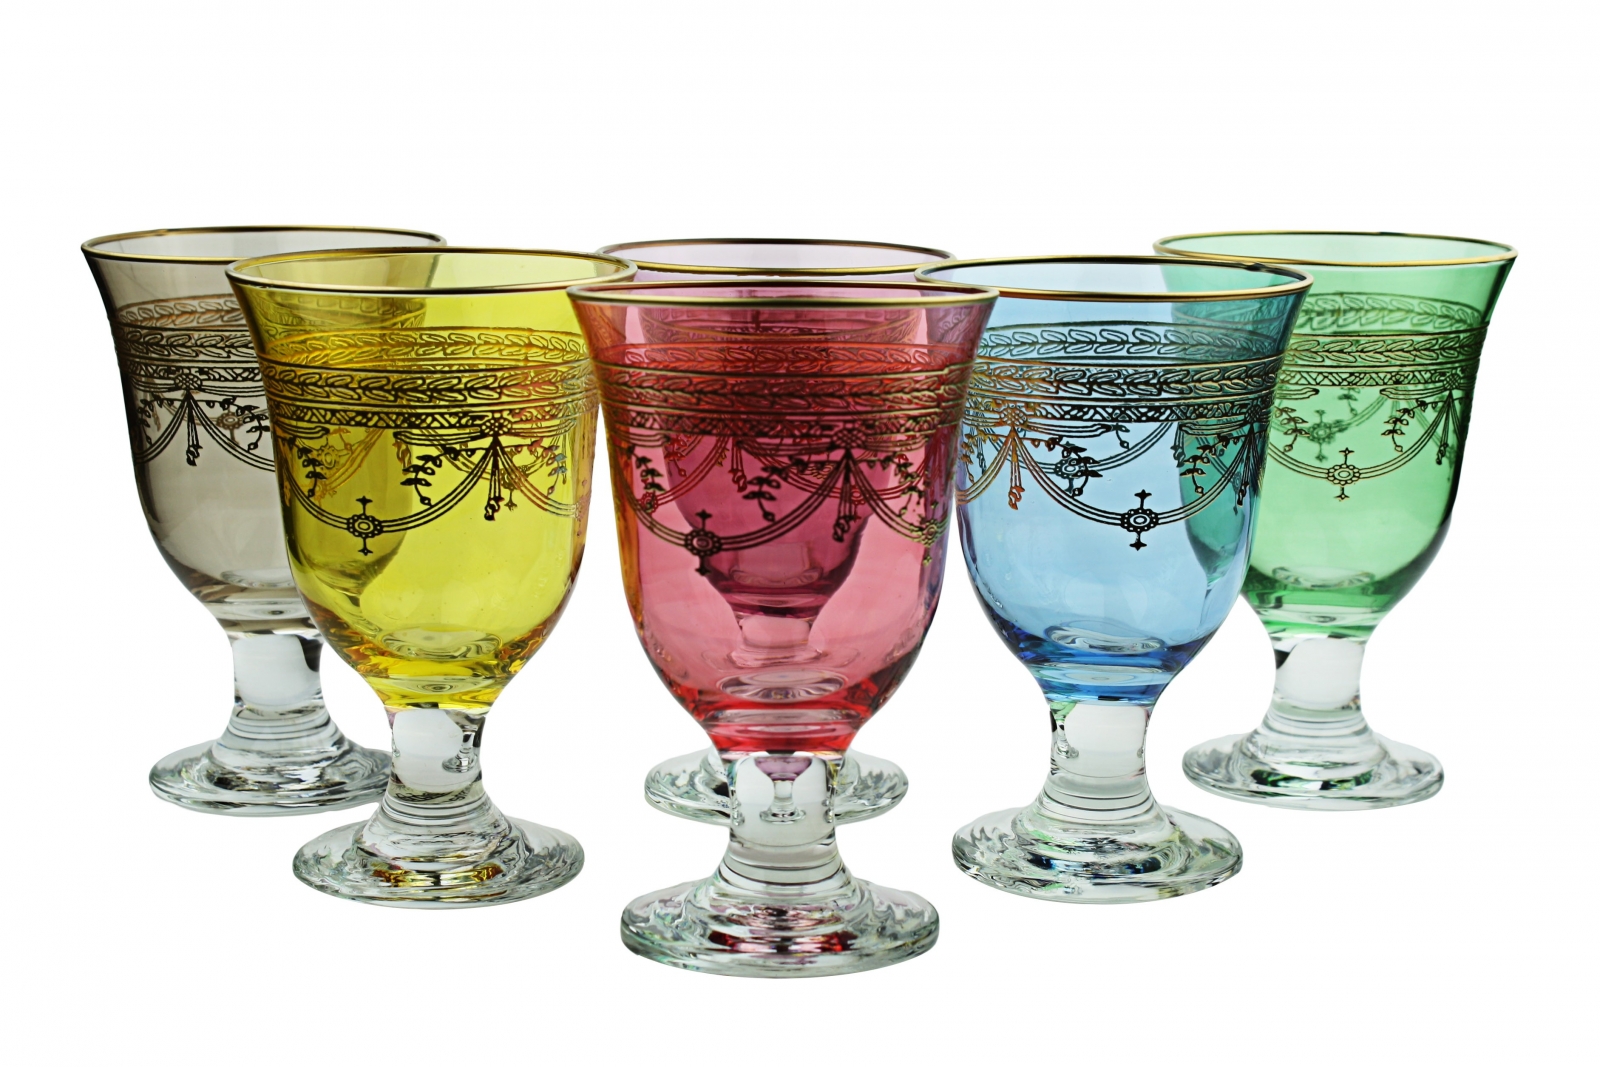 Set Of 6 Colored Wine Glasses With Rich Gold Design Dishwashing Safe World Art Glass Murano